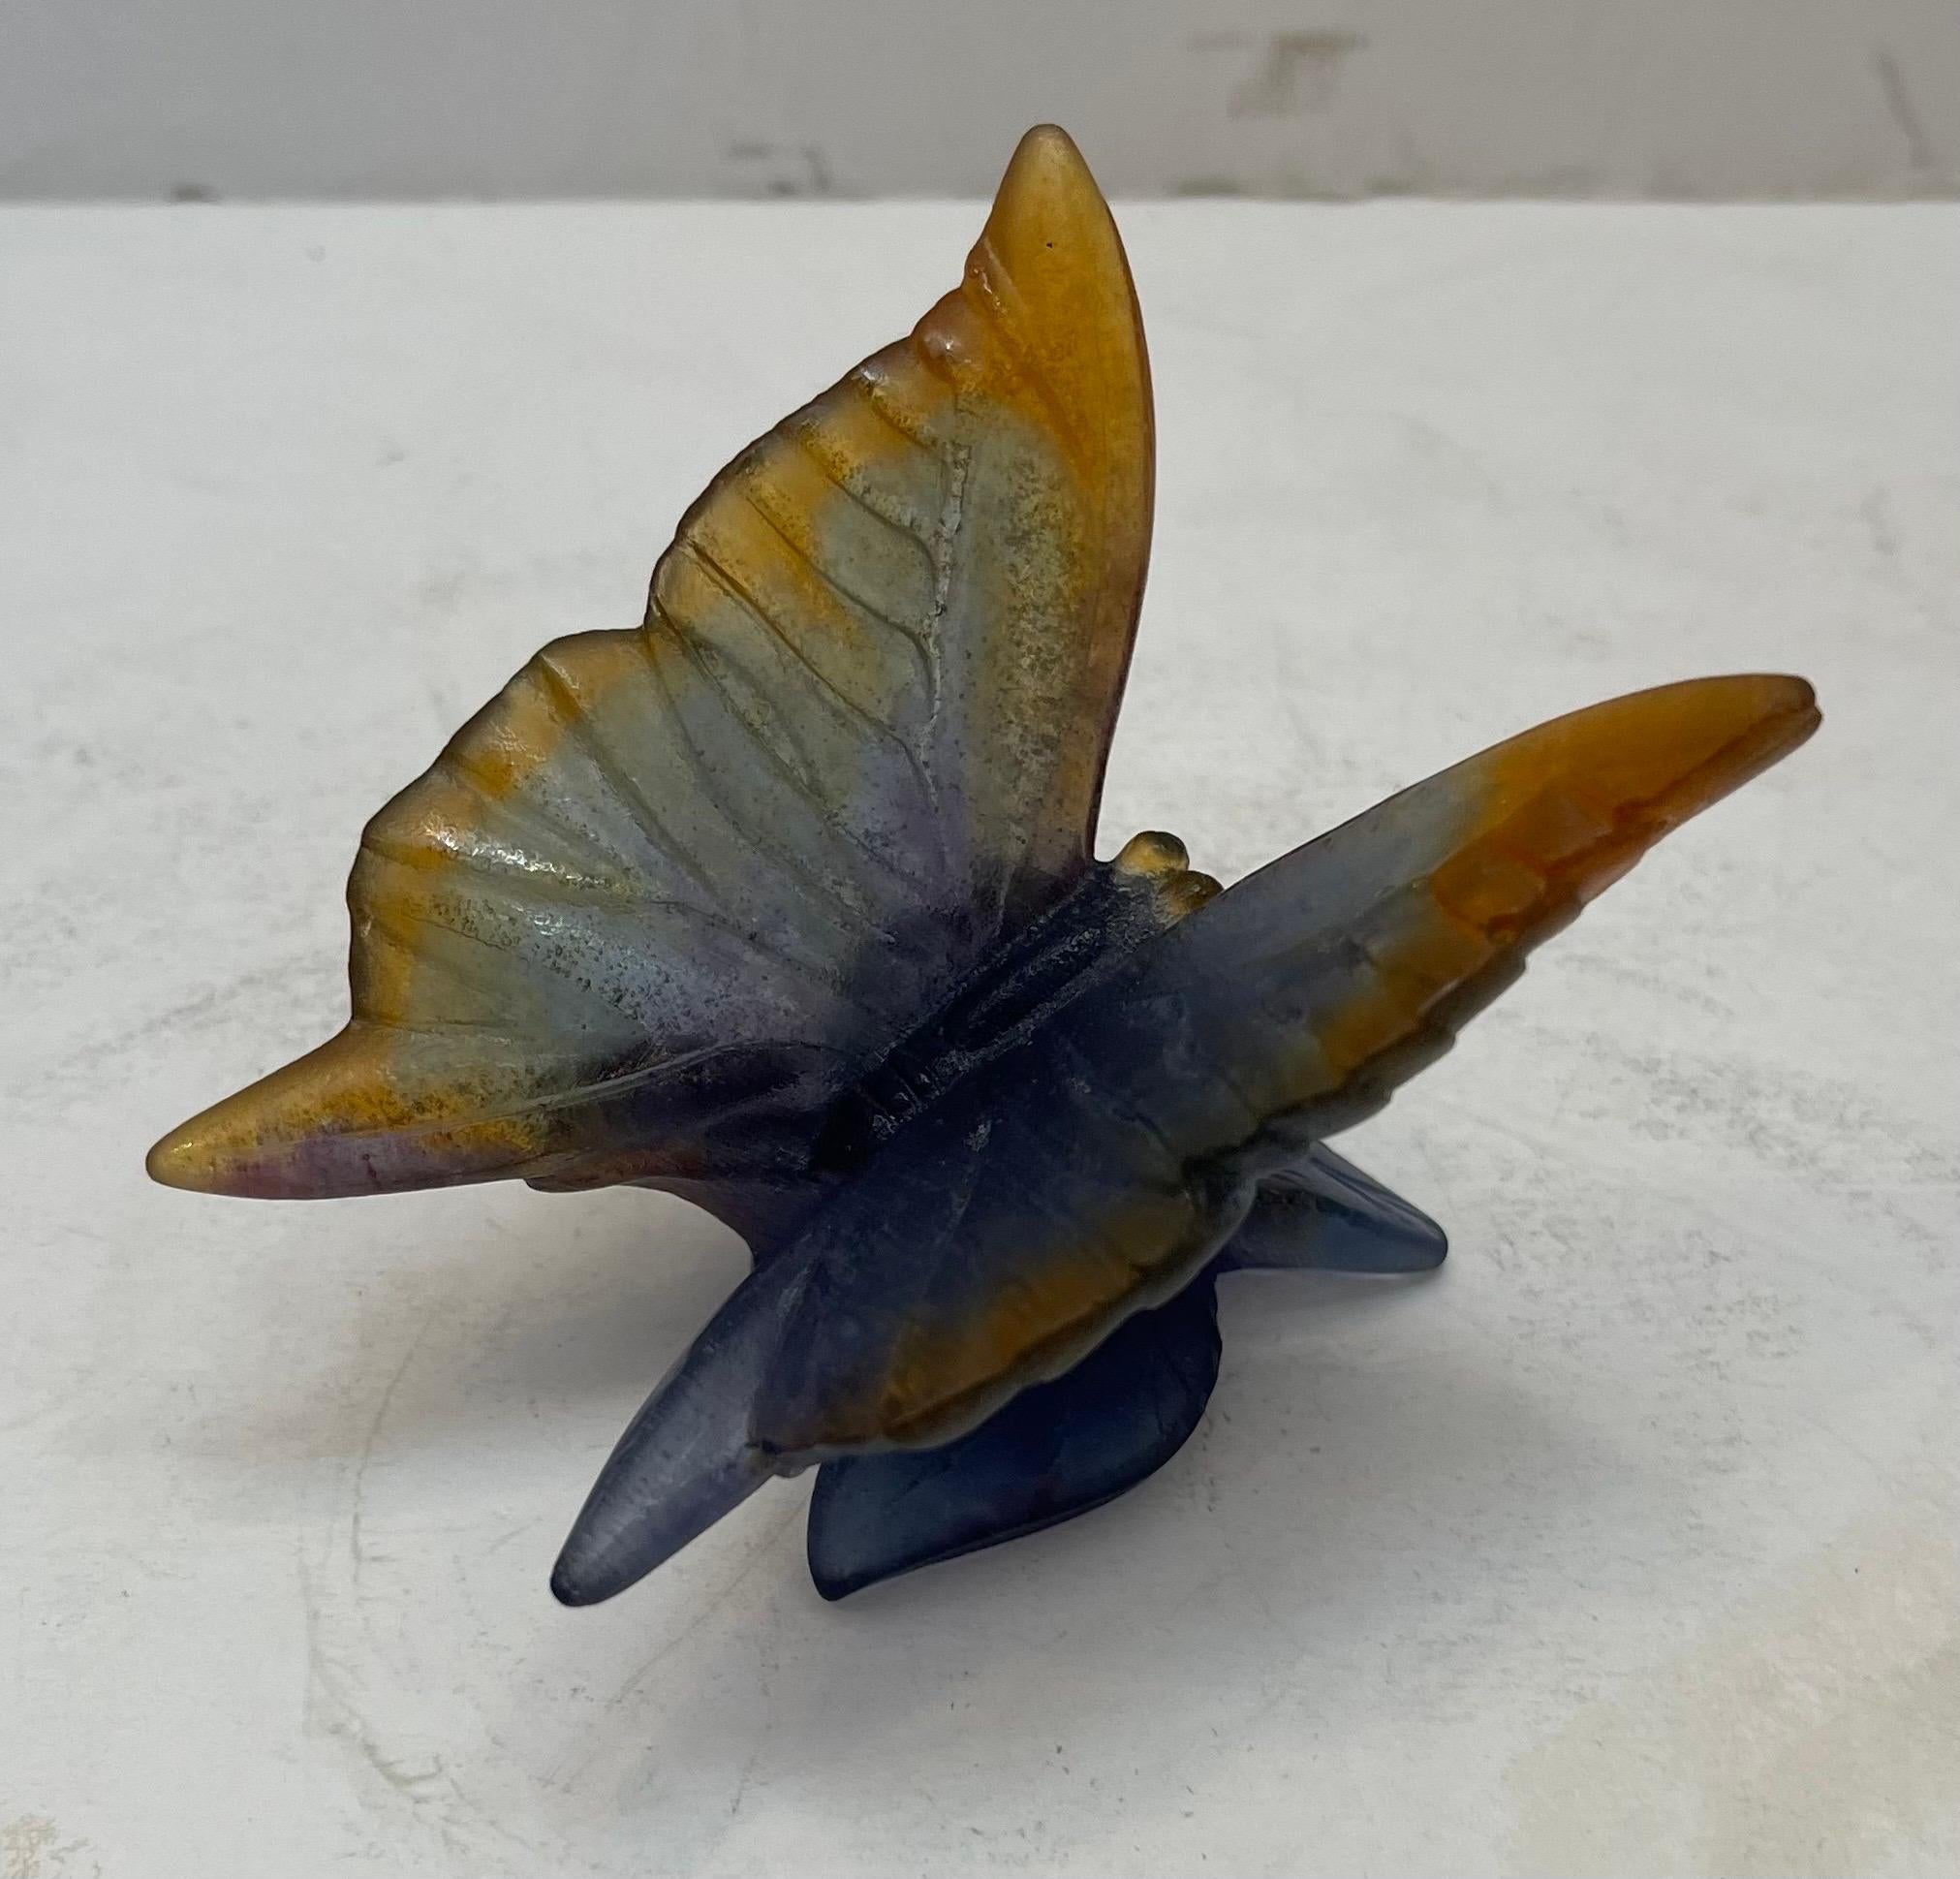 A Wonderful Crystal Daum Pate De Verre Papillon Butterfly Perched On A Leaf  & Flower Sculpture Paperweight 